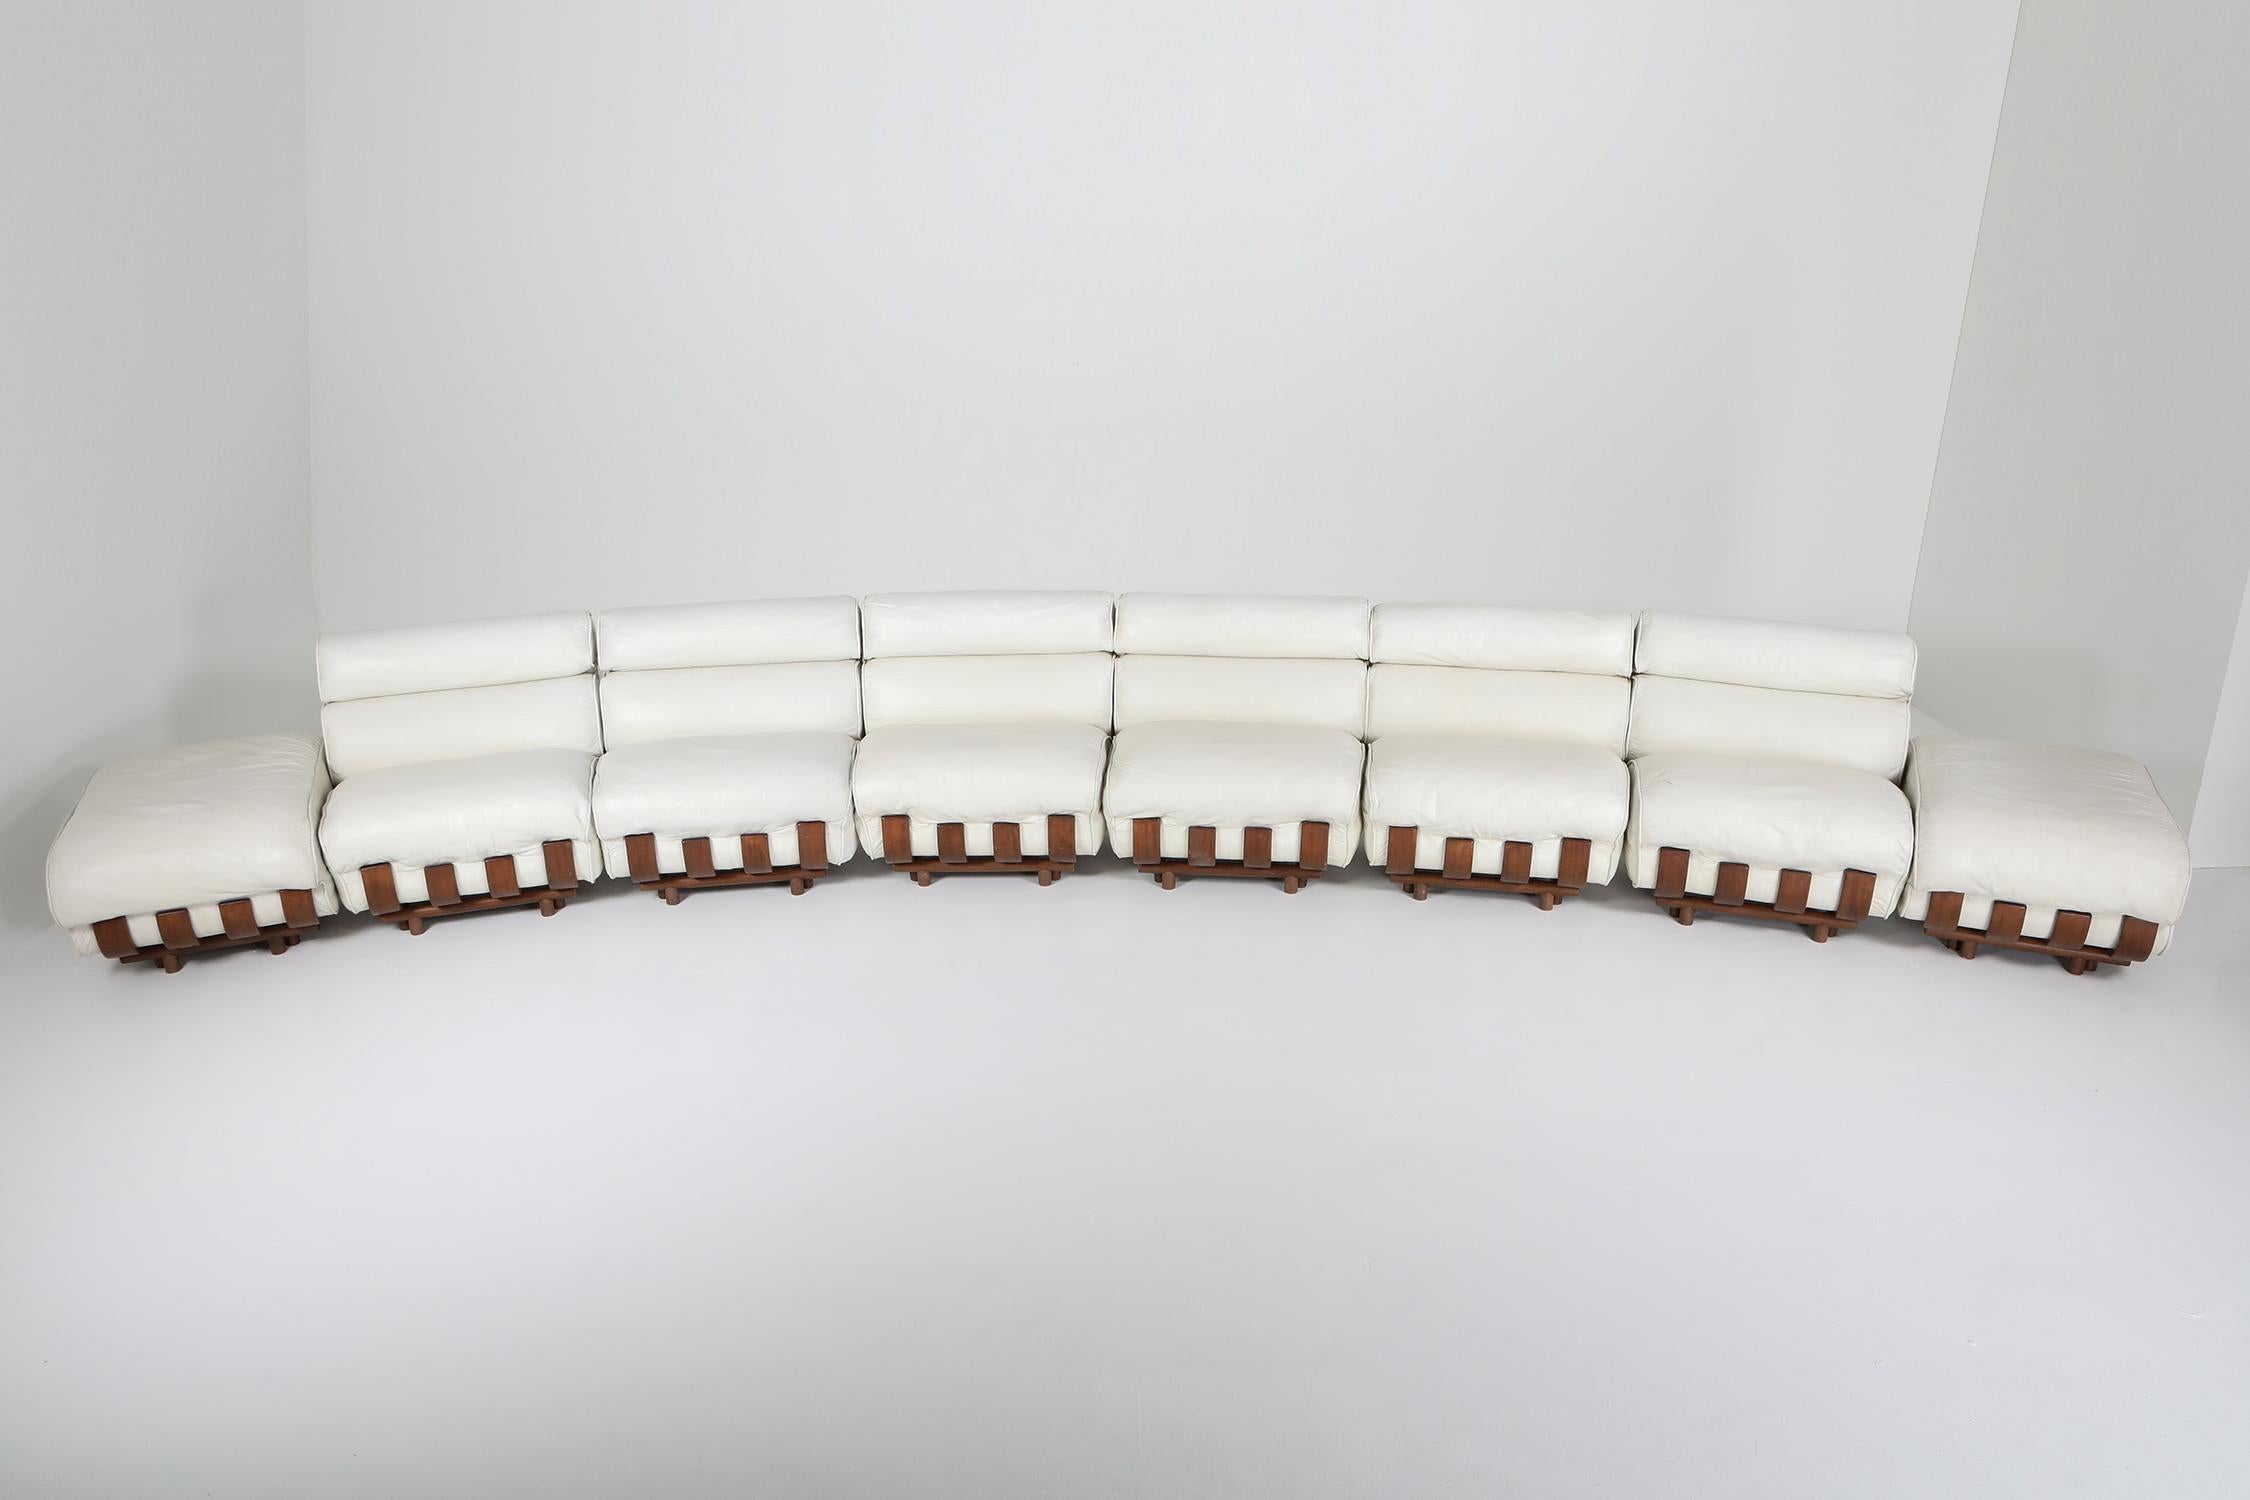 Luciano Frigerio, sectional couch, Postmodern, Italy 1980s

Luxury leather piece, big and comfy seating mounted on a super nice walnut frame.
The frame reminds a bit of the costela chairs
The entire sectional consists out of 6 lounge chairs and